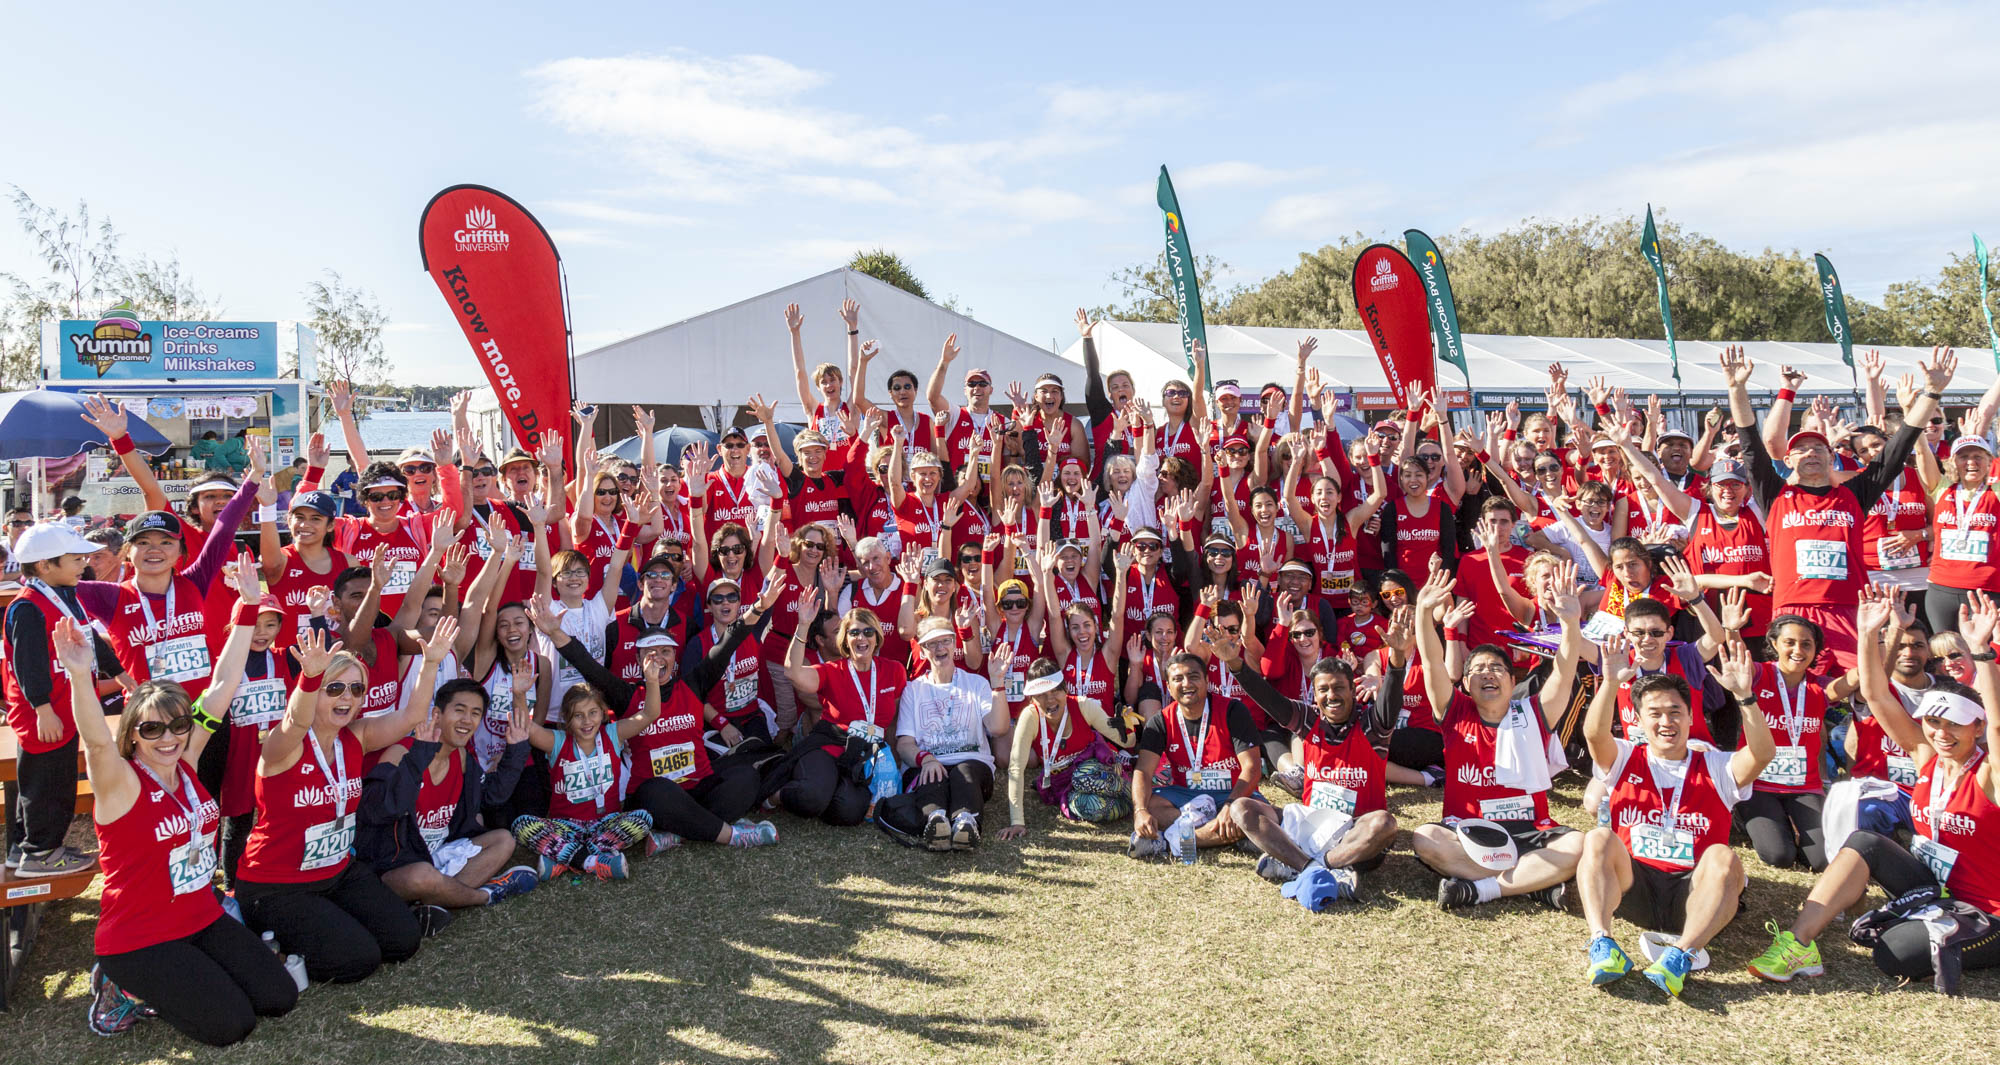 Team Griffith last year won the title of Largest Corporate Team at the week's Gold Coast Airport Marathon.